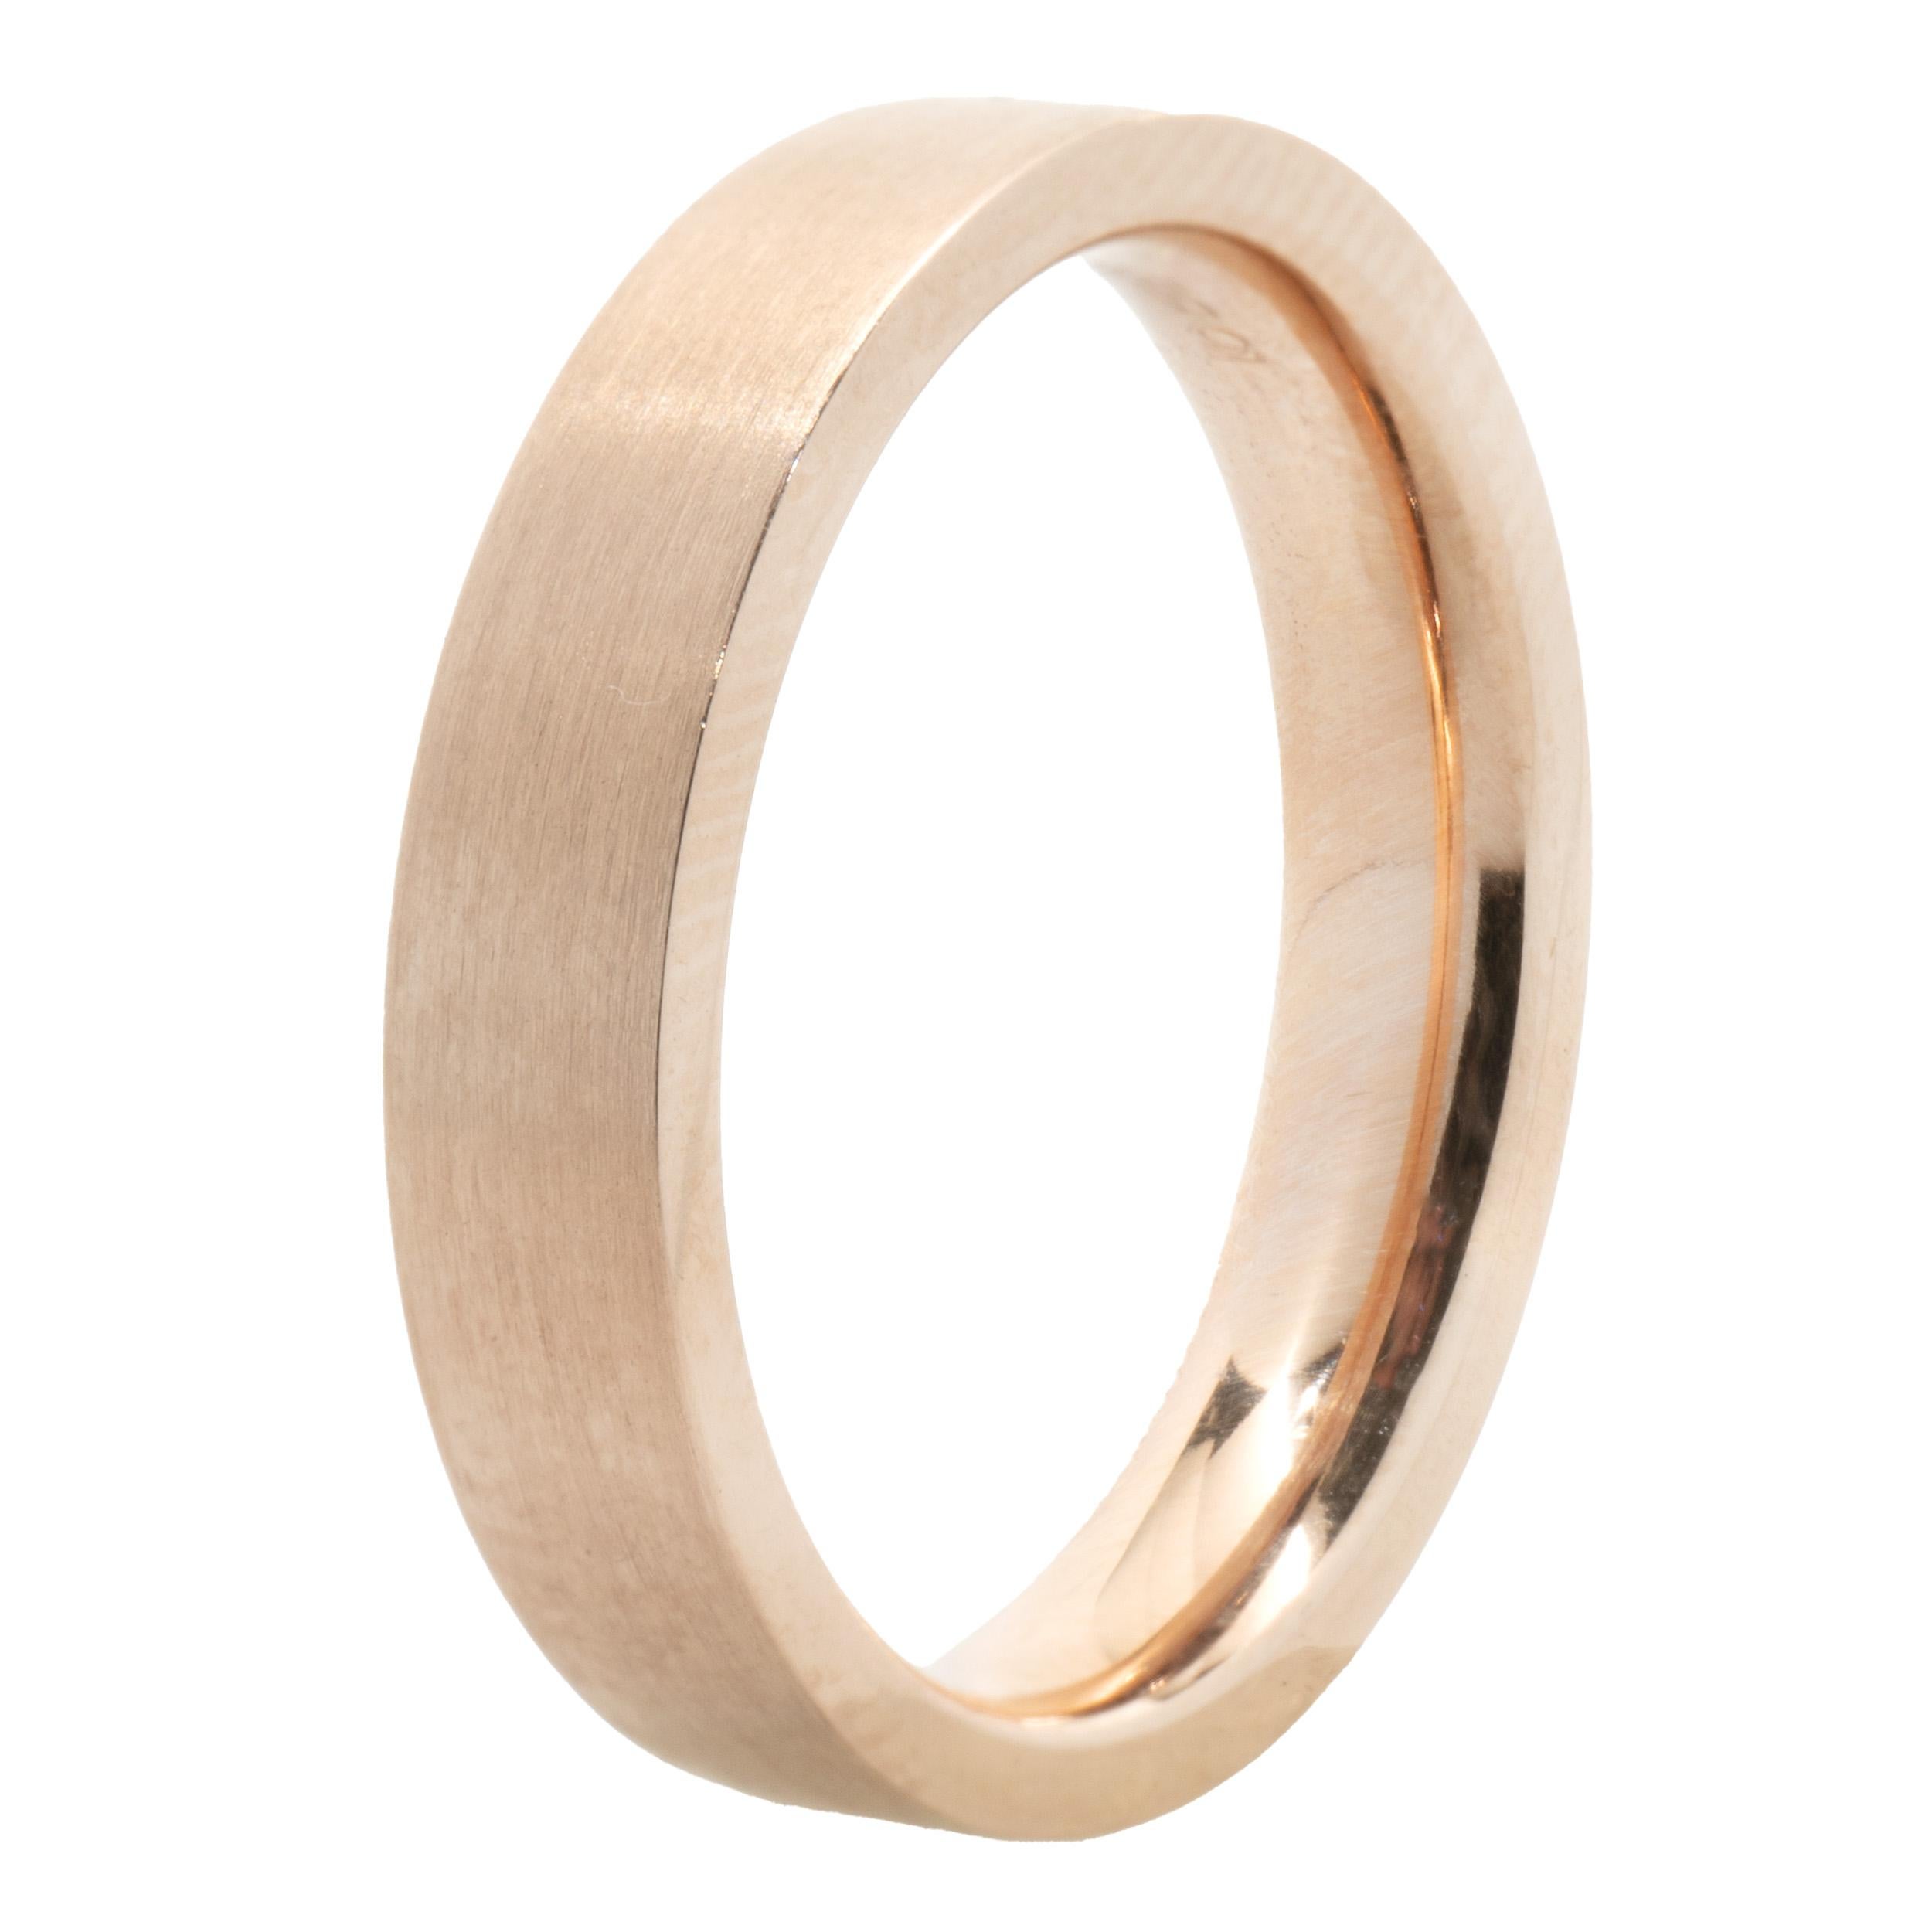 Designer: custom
Material: 14K rose gold
Dimensions: ring top measures 4mm wide
Ring Size: 6 (please allow two extra shipping days for sizing requests) 
Weight: 5.02 grams